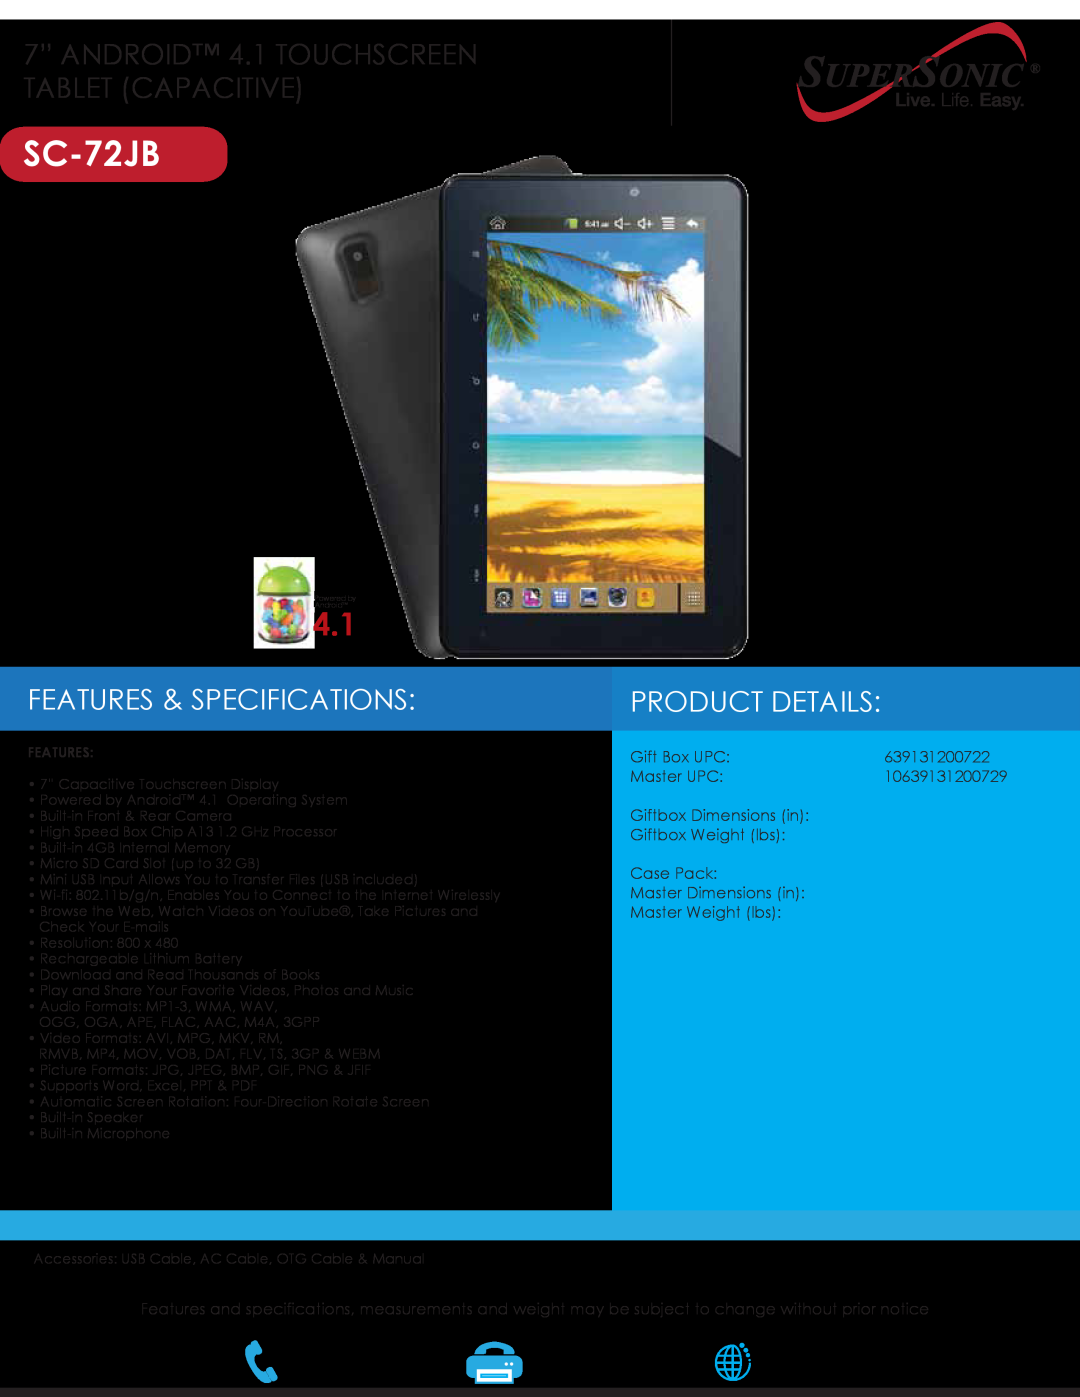 Supersonic SC72JB specifications SC-72JB, 7” ANDROID 4.1 TOUCHSCREEN TABLET CAPACITIVE, Features & Specifications 